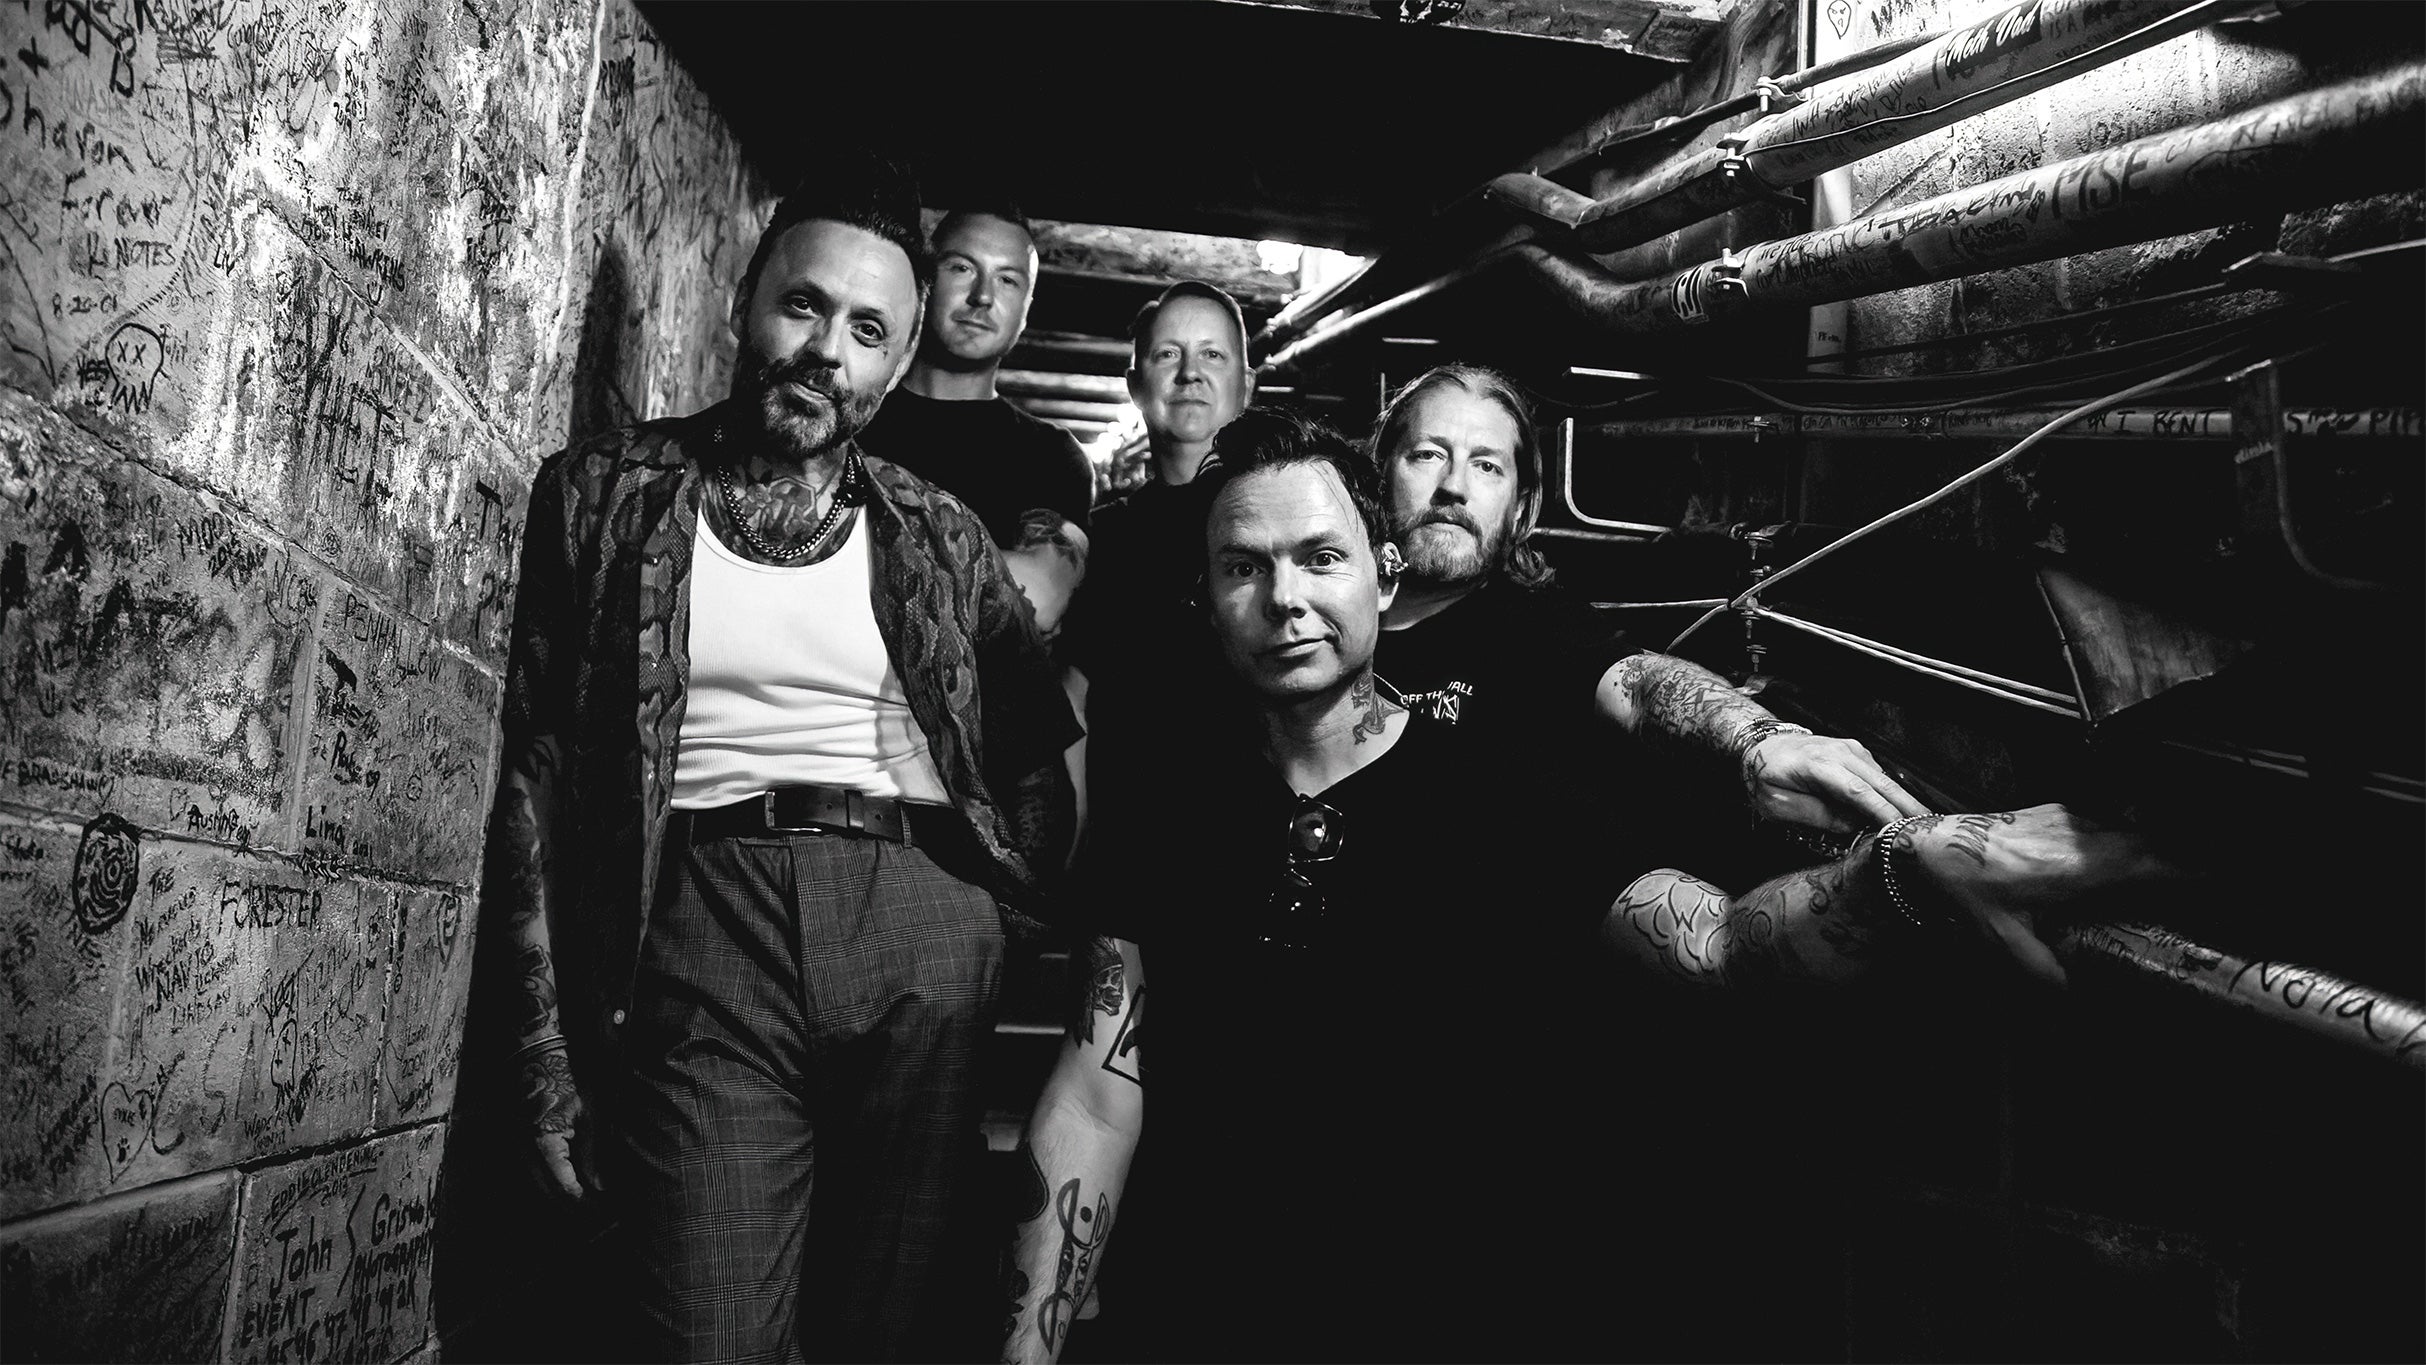 Blue October free pre-sale code for event tickets in Orlando, FL (Dr Phillips Center for the Performing Arts)